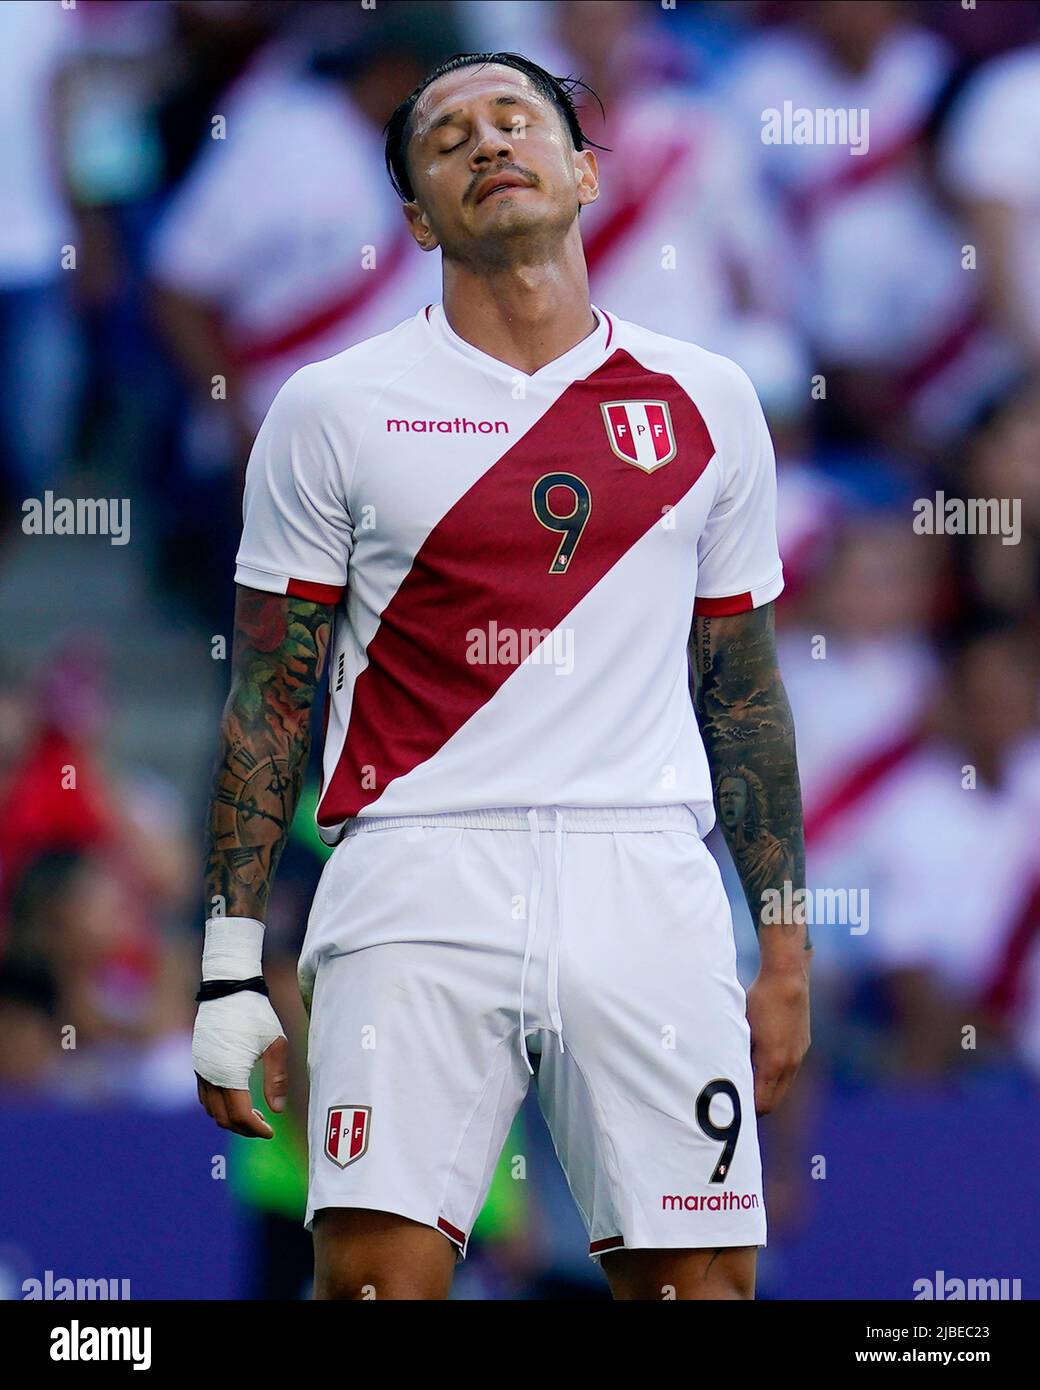 Barcelona, Spain. June 5, 2022, Gianluca Lapadula of Peru during the friendly match between Peru and New Zealand played at RCDE Stadium on June 5, 2022 in Barcelona, Spain. (Photo by Bagu Blanco / PRESSINPHOTO) Stock Photo